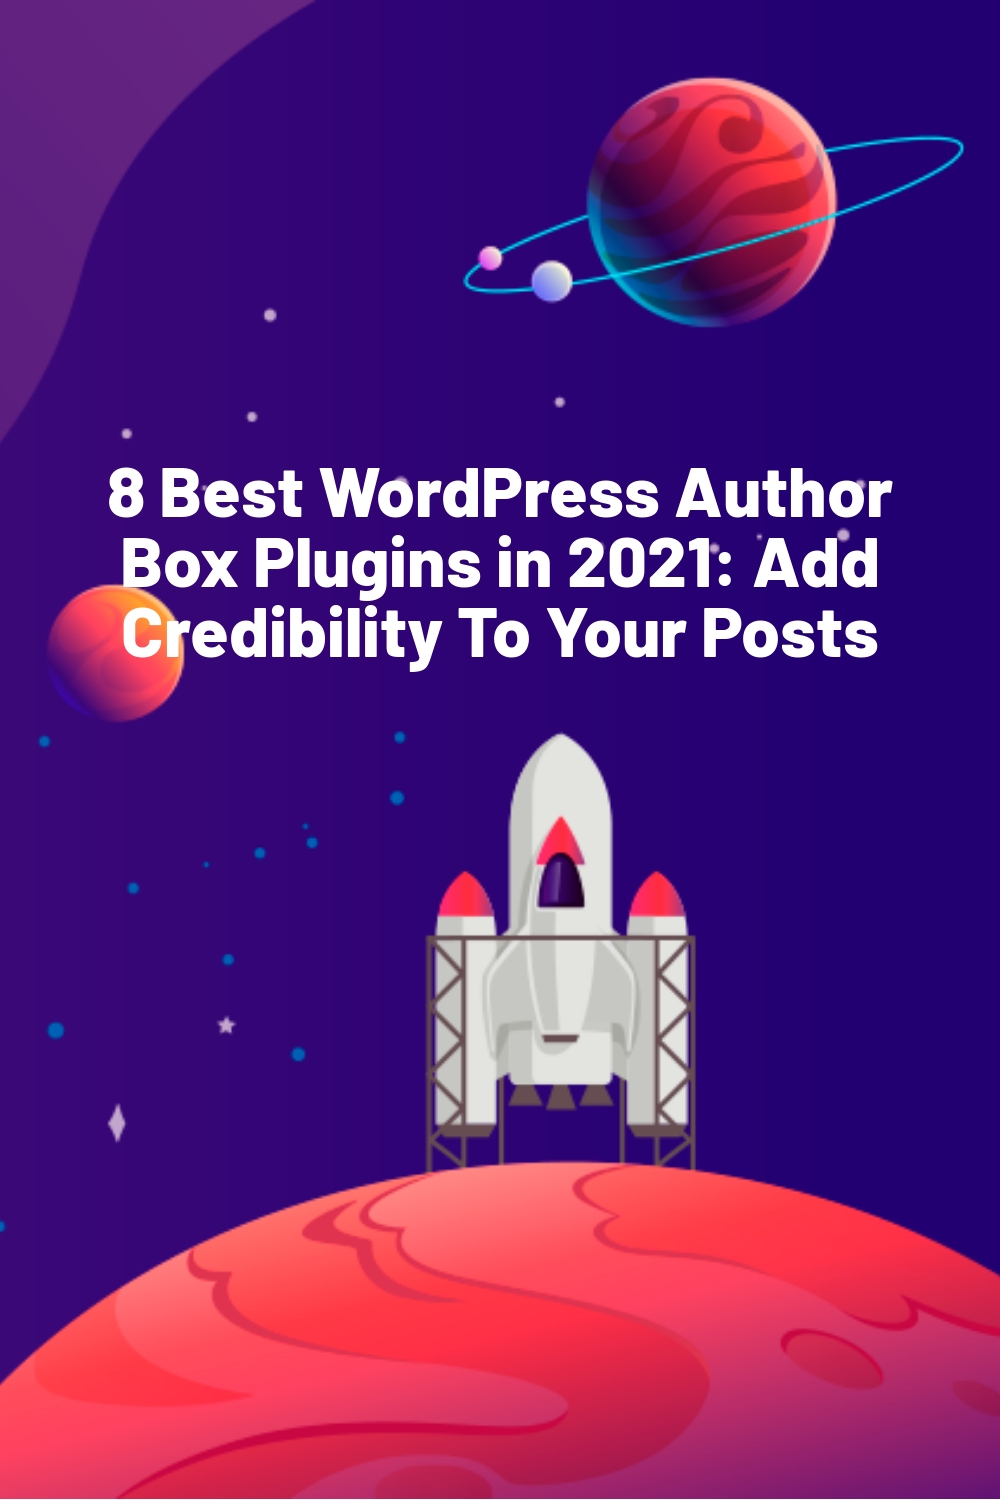 8 Best WordPress Author Box Plugins in 2021: Add Credibility To Your Posts